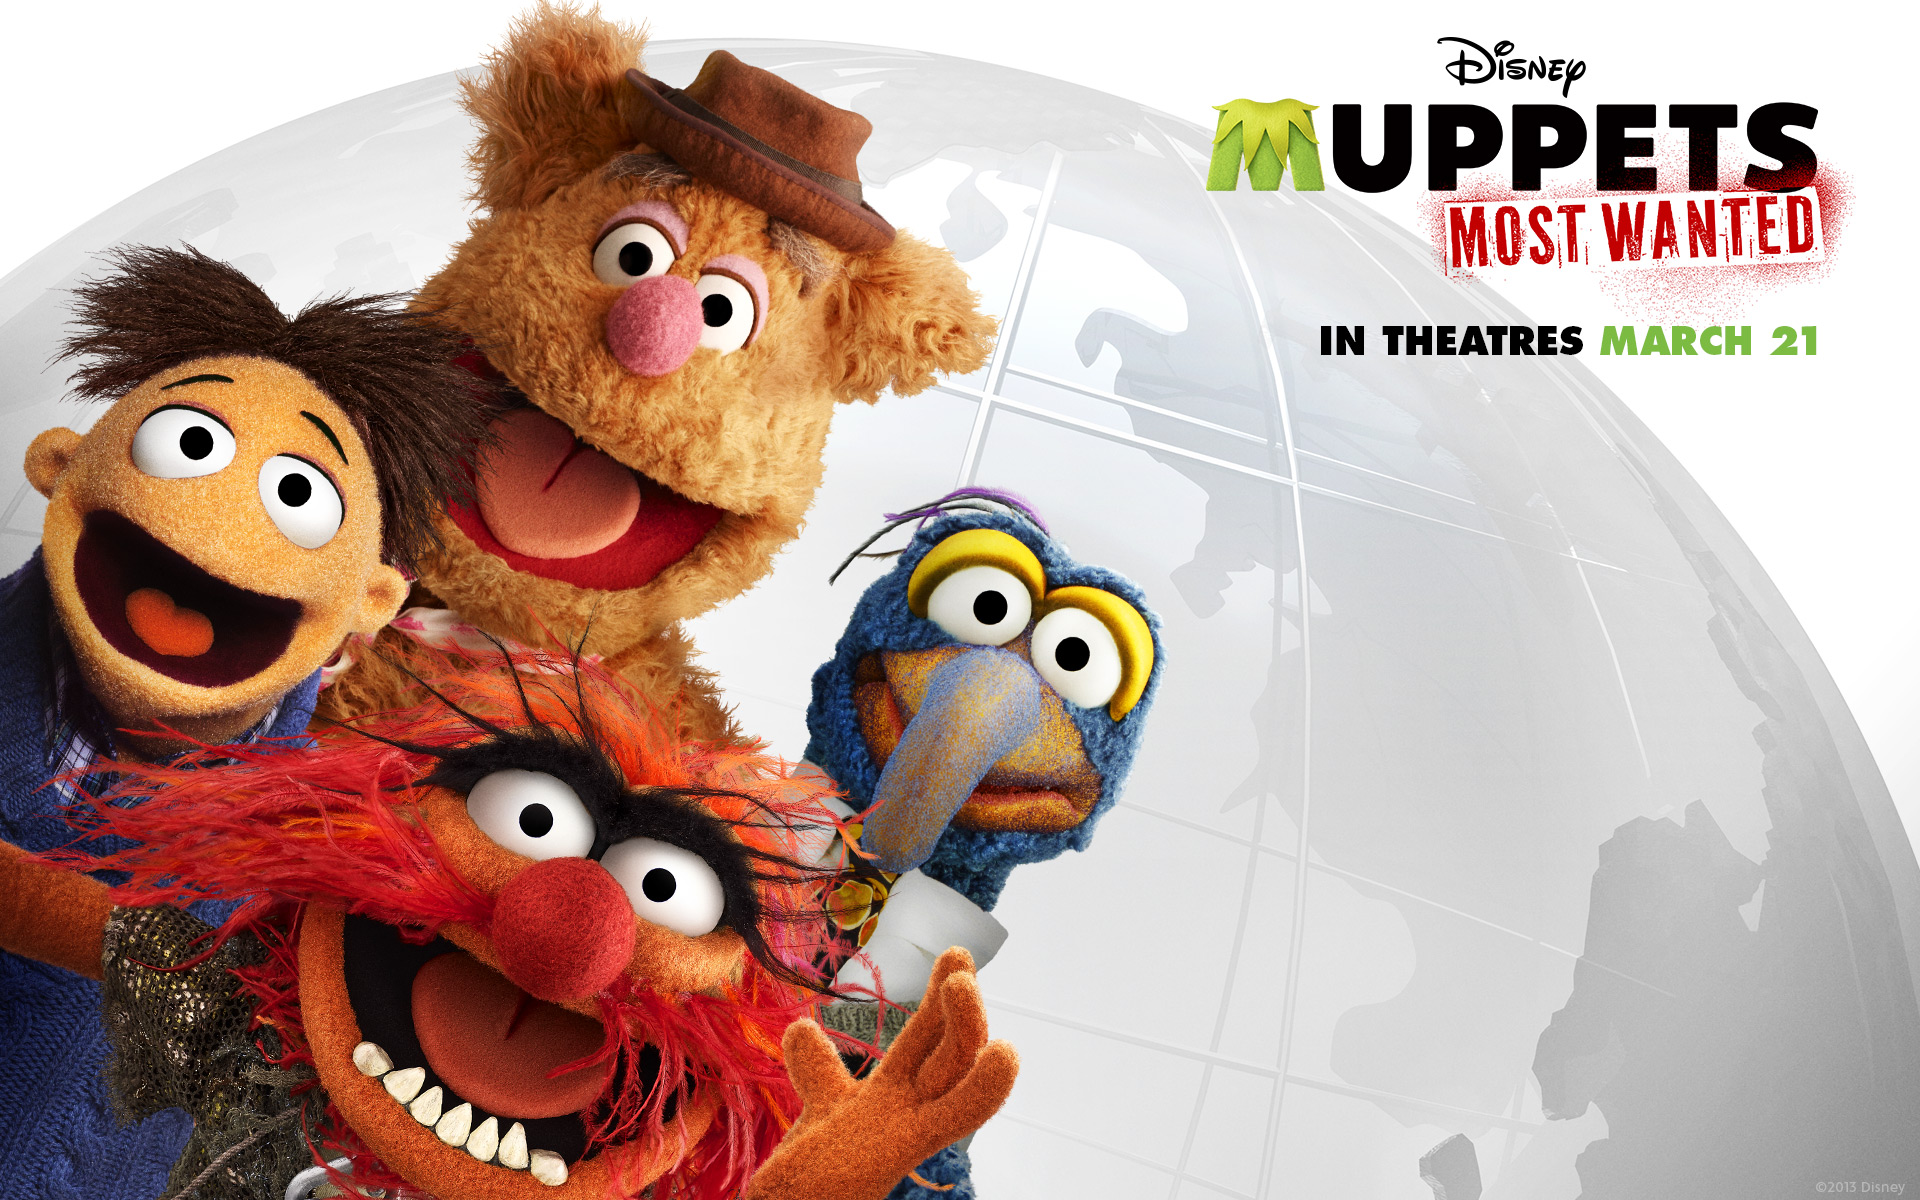 muppets most wanted movie poster